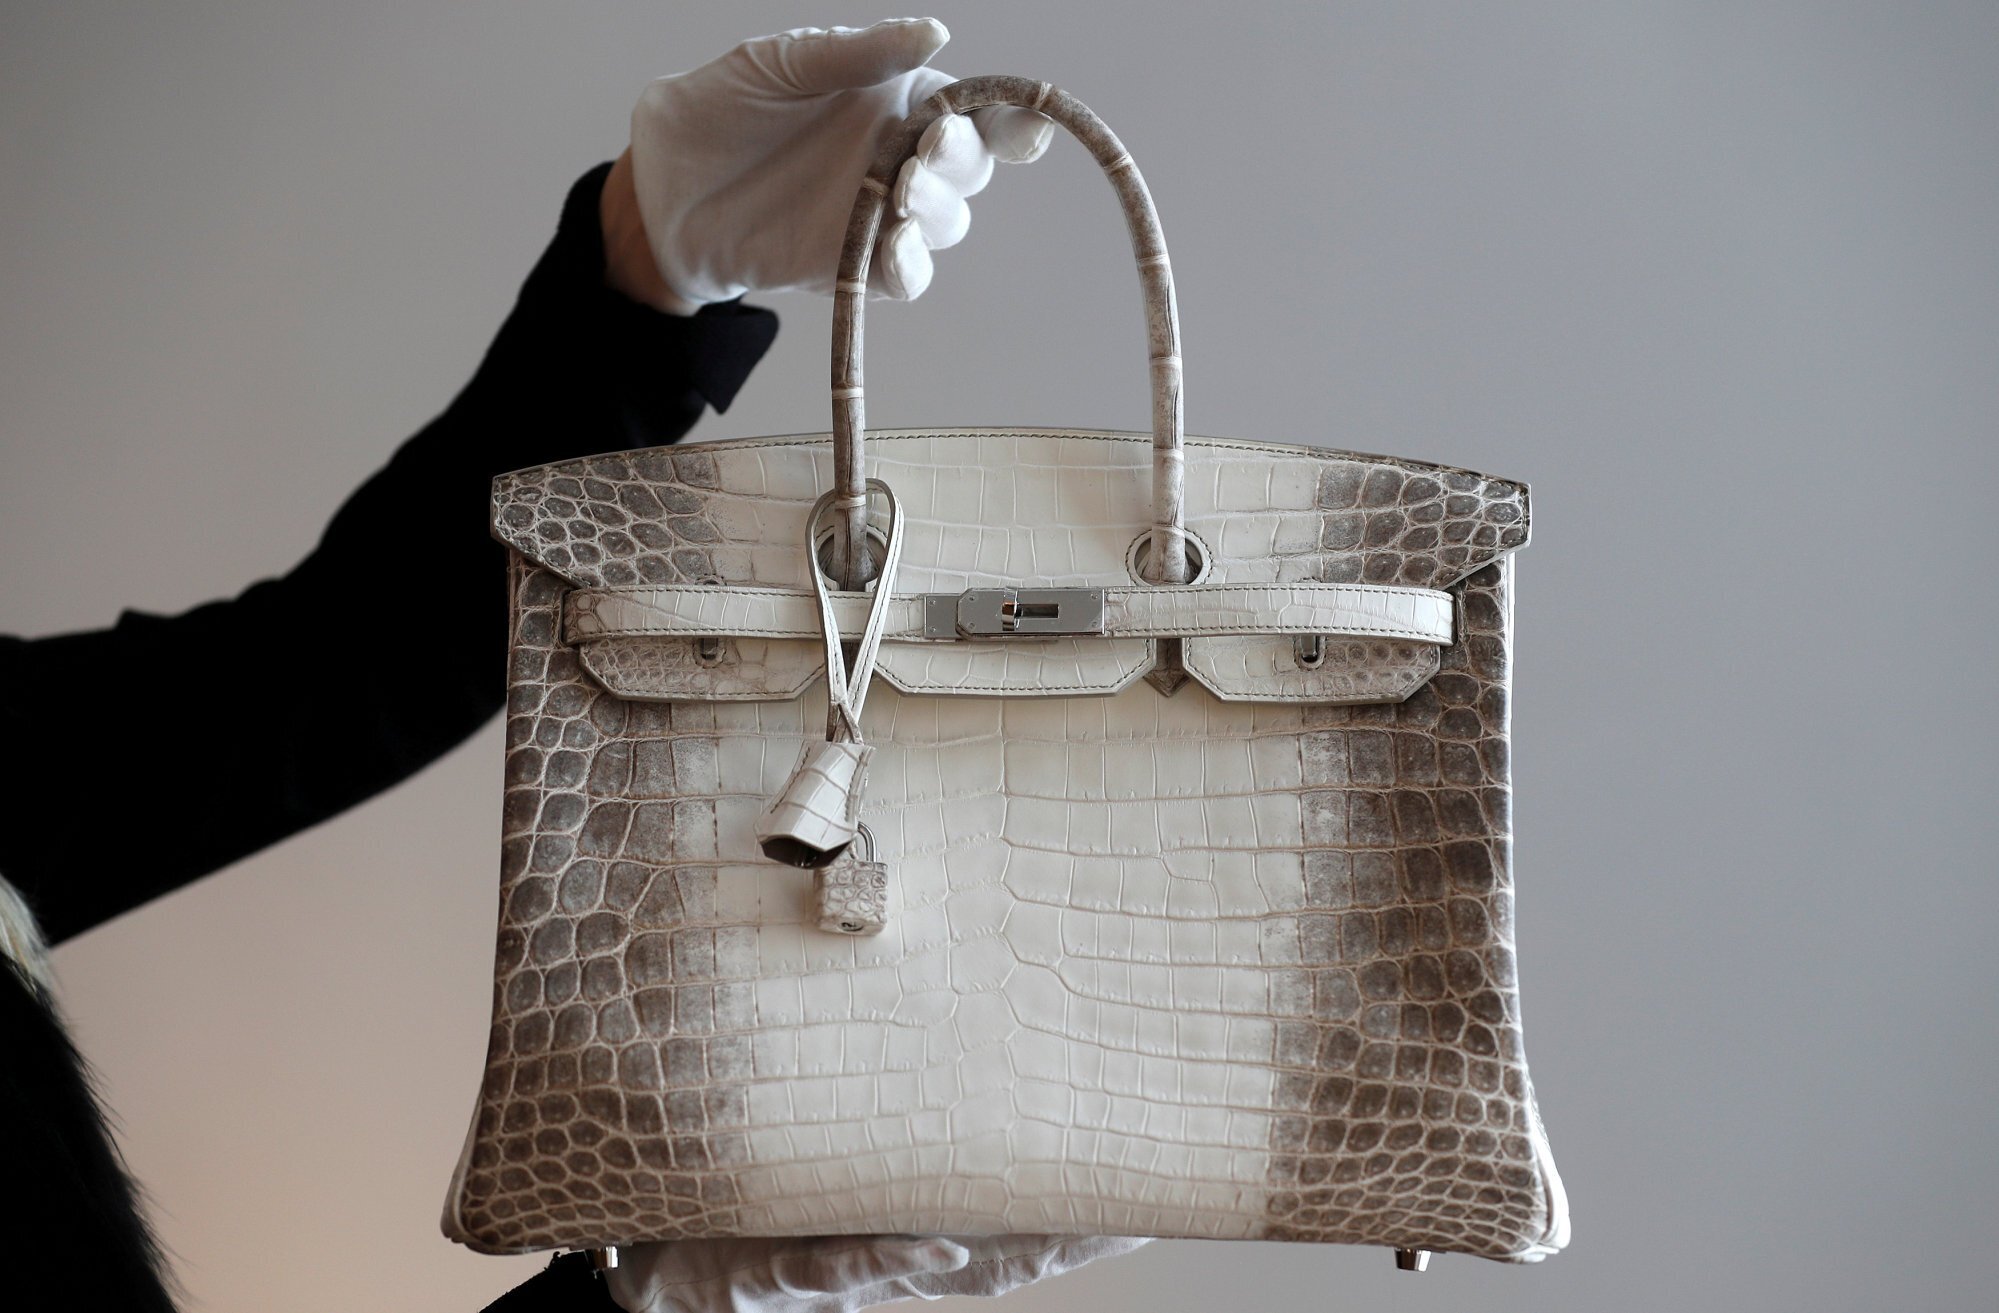 Why Are Birkin Bags So Expensive? The 6 Key Reasons Why